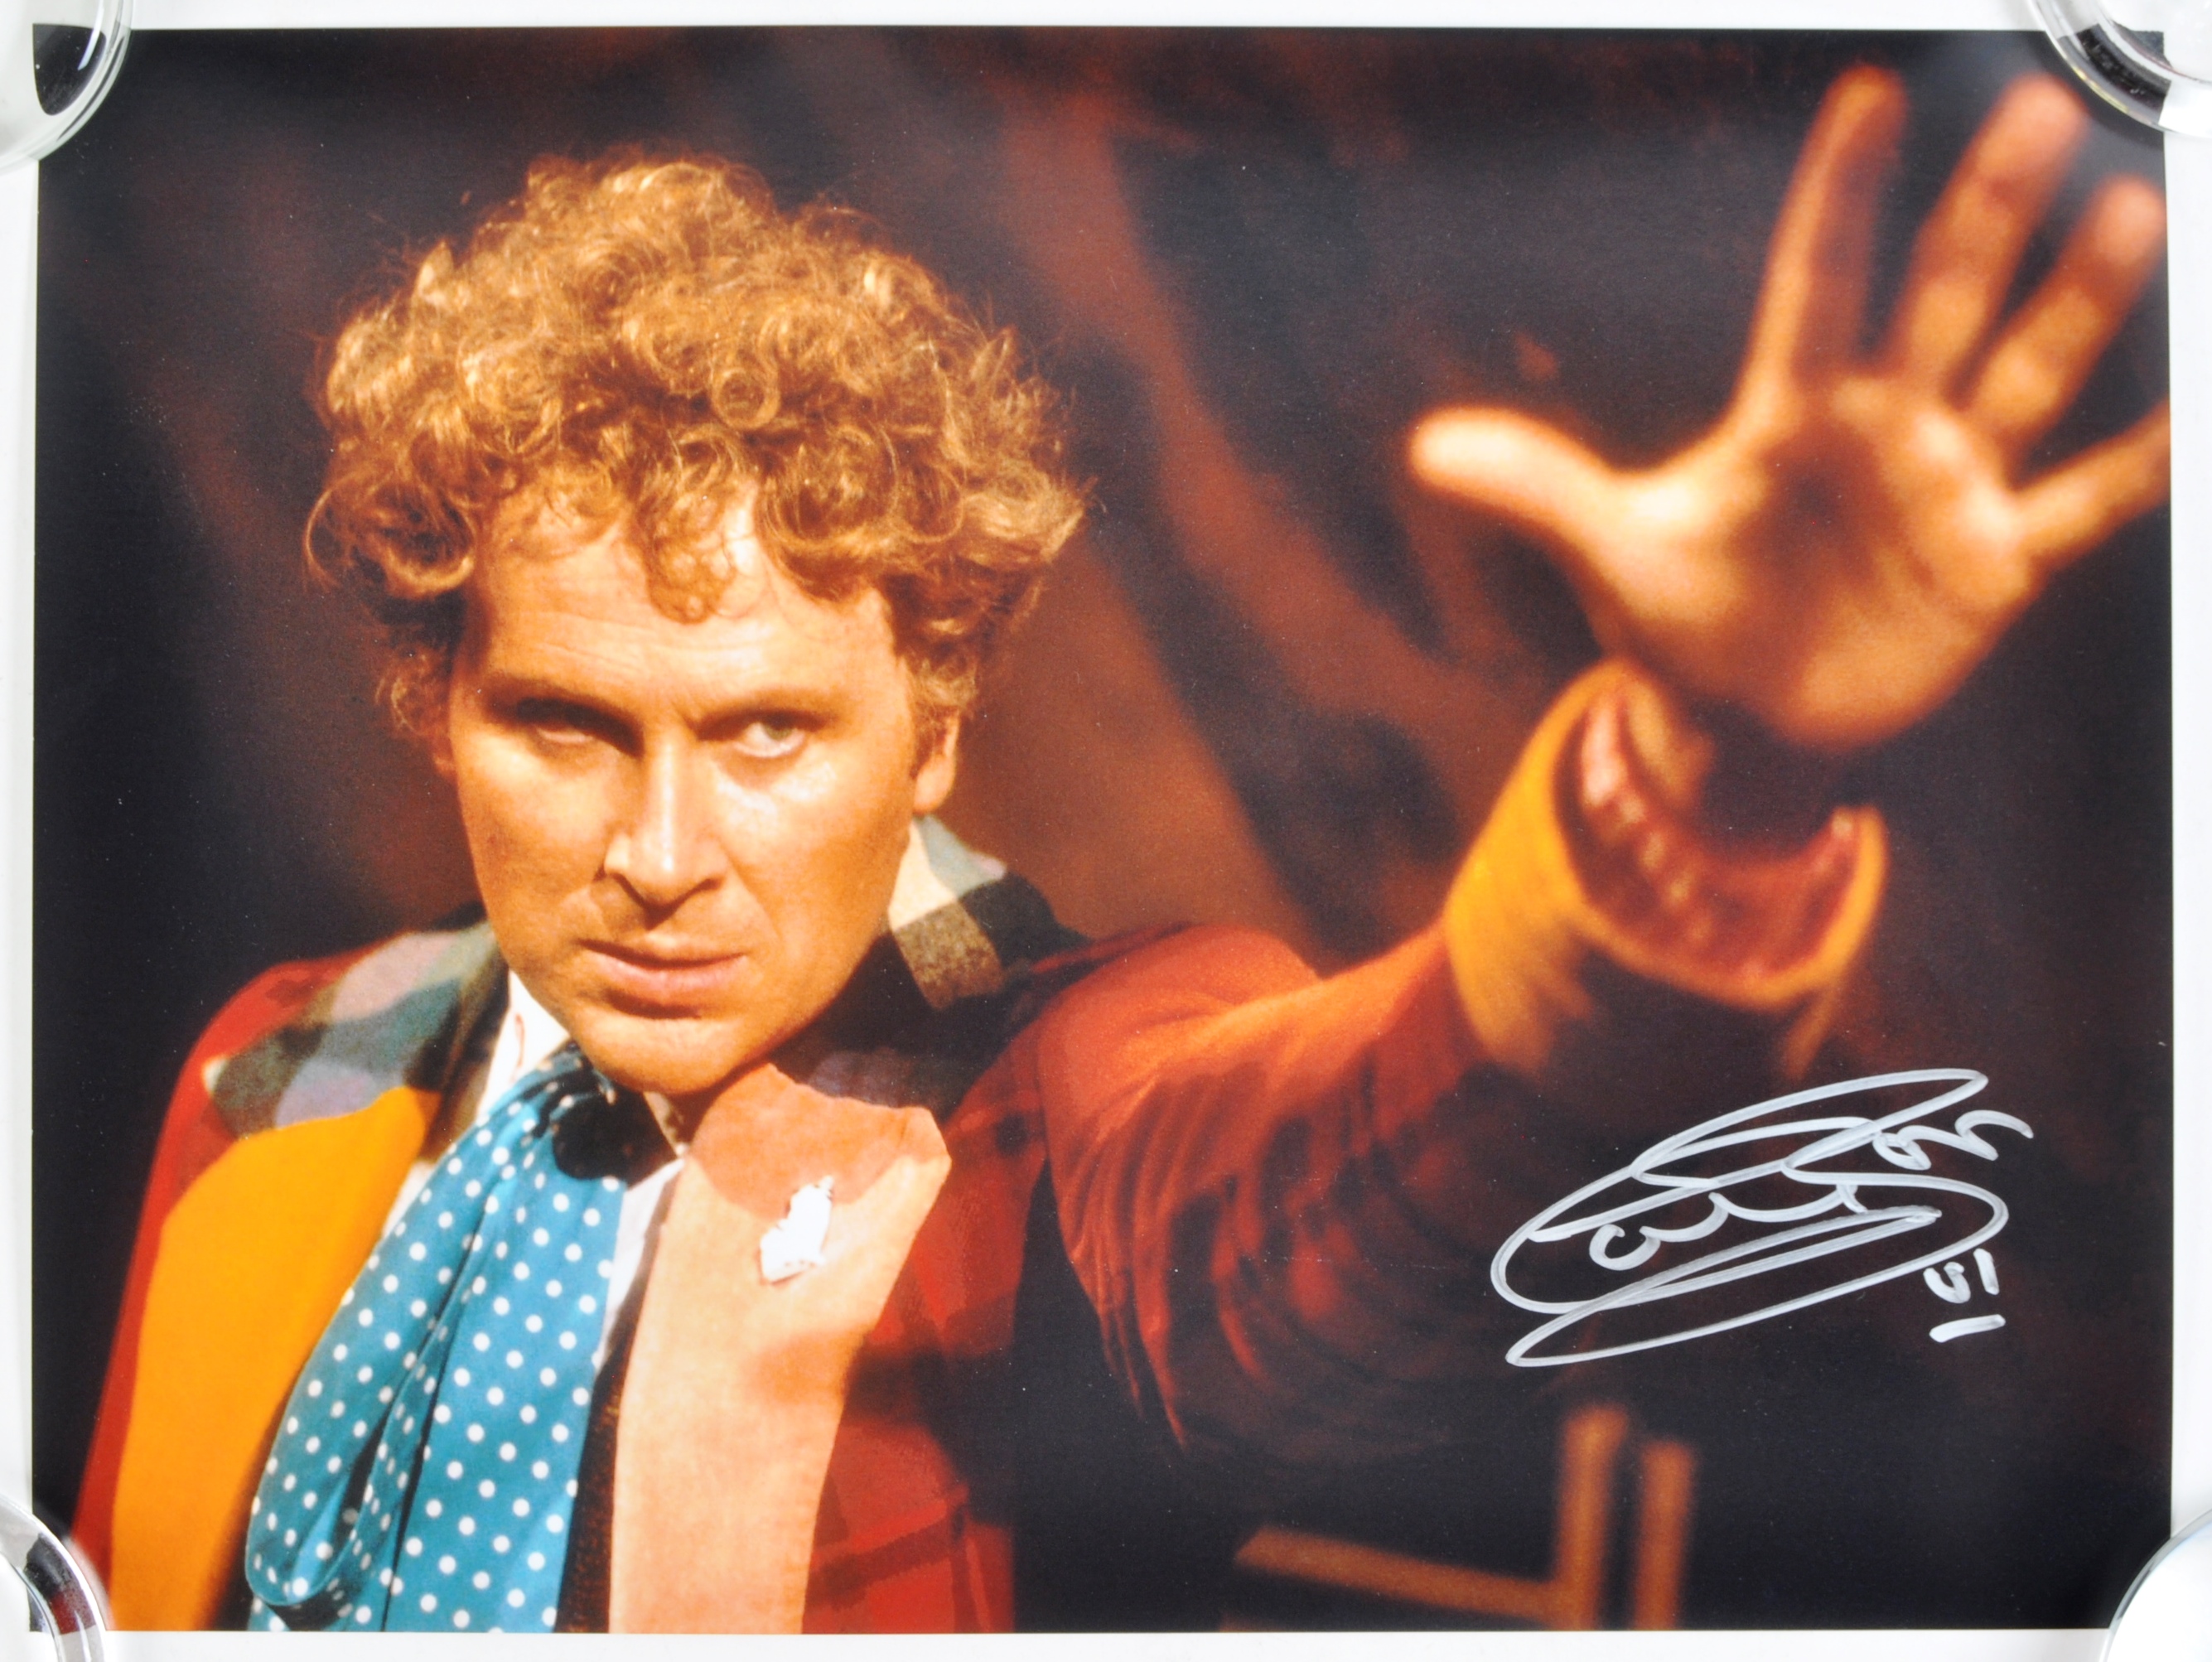 DOCTOR WHO - COLIN BAKER - AUTOGRAPHED 16X12" PHOTOGRAPH